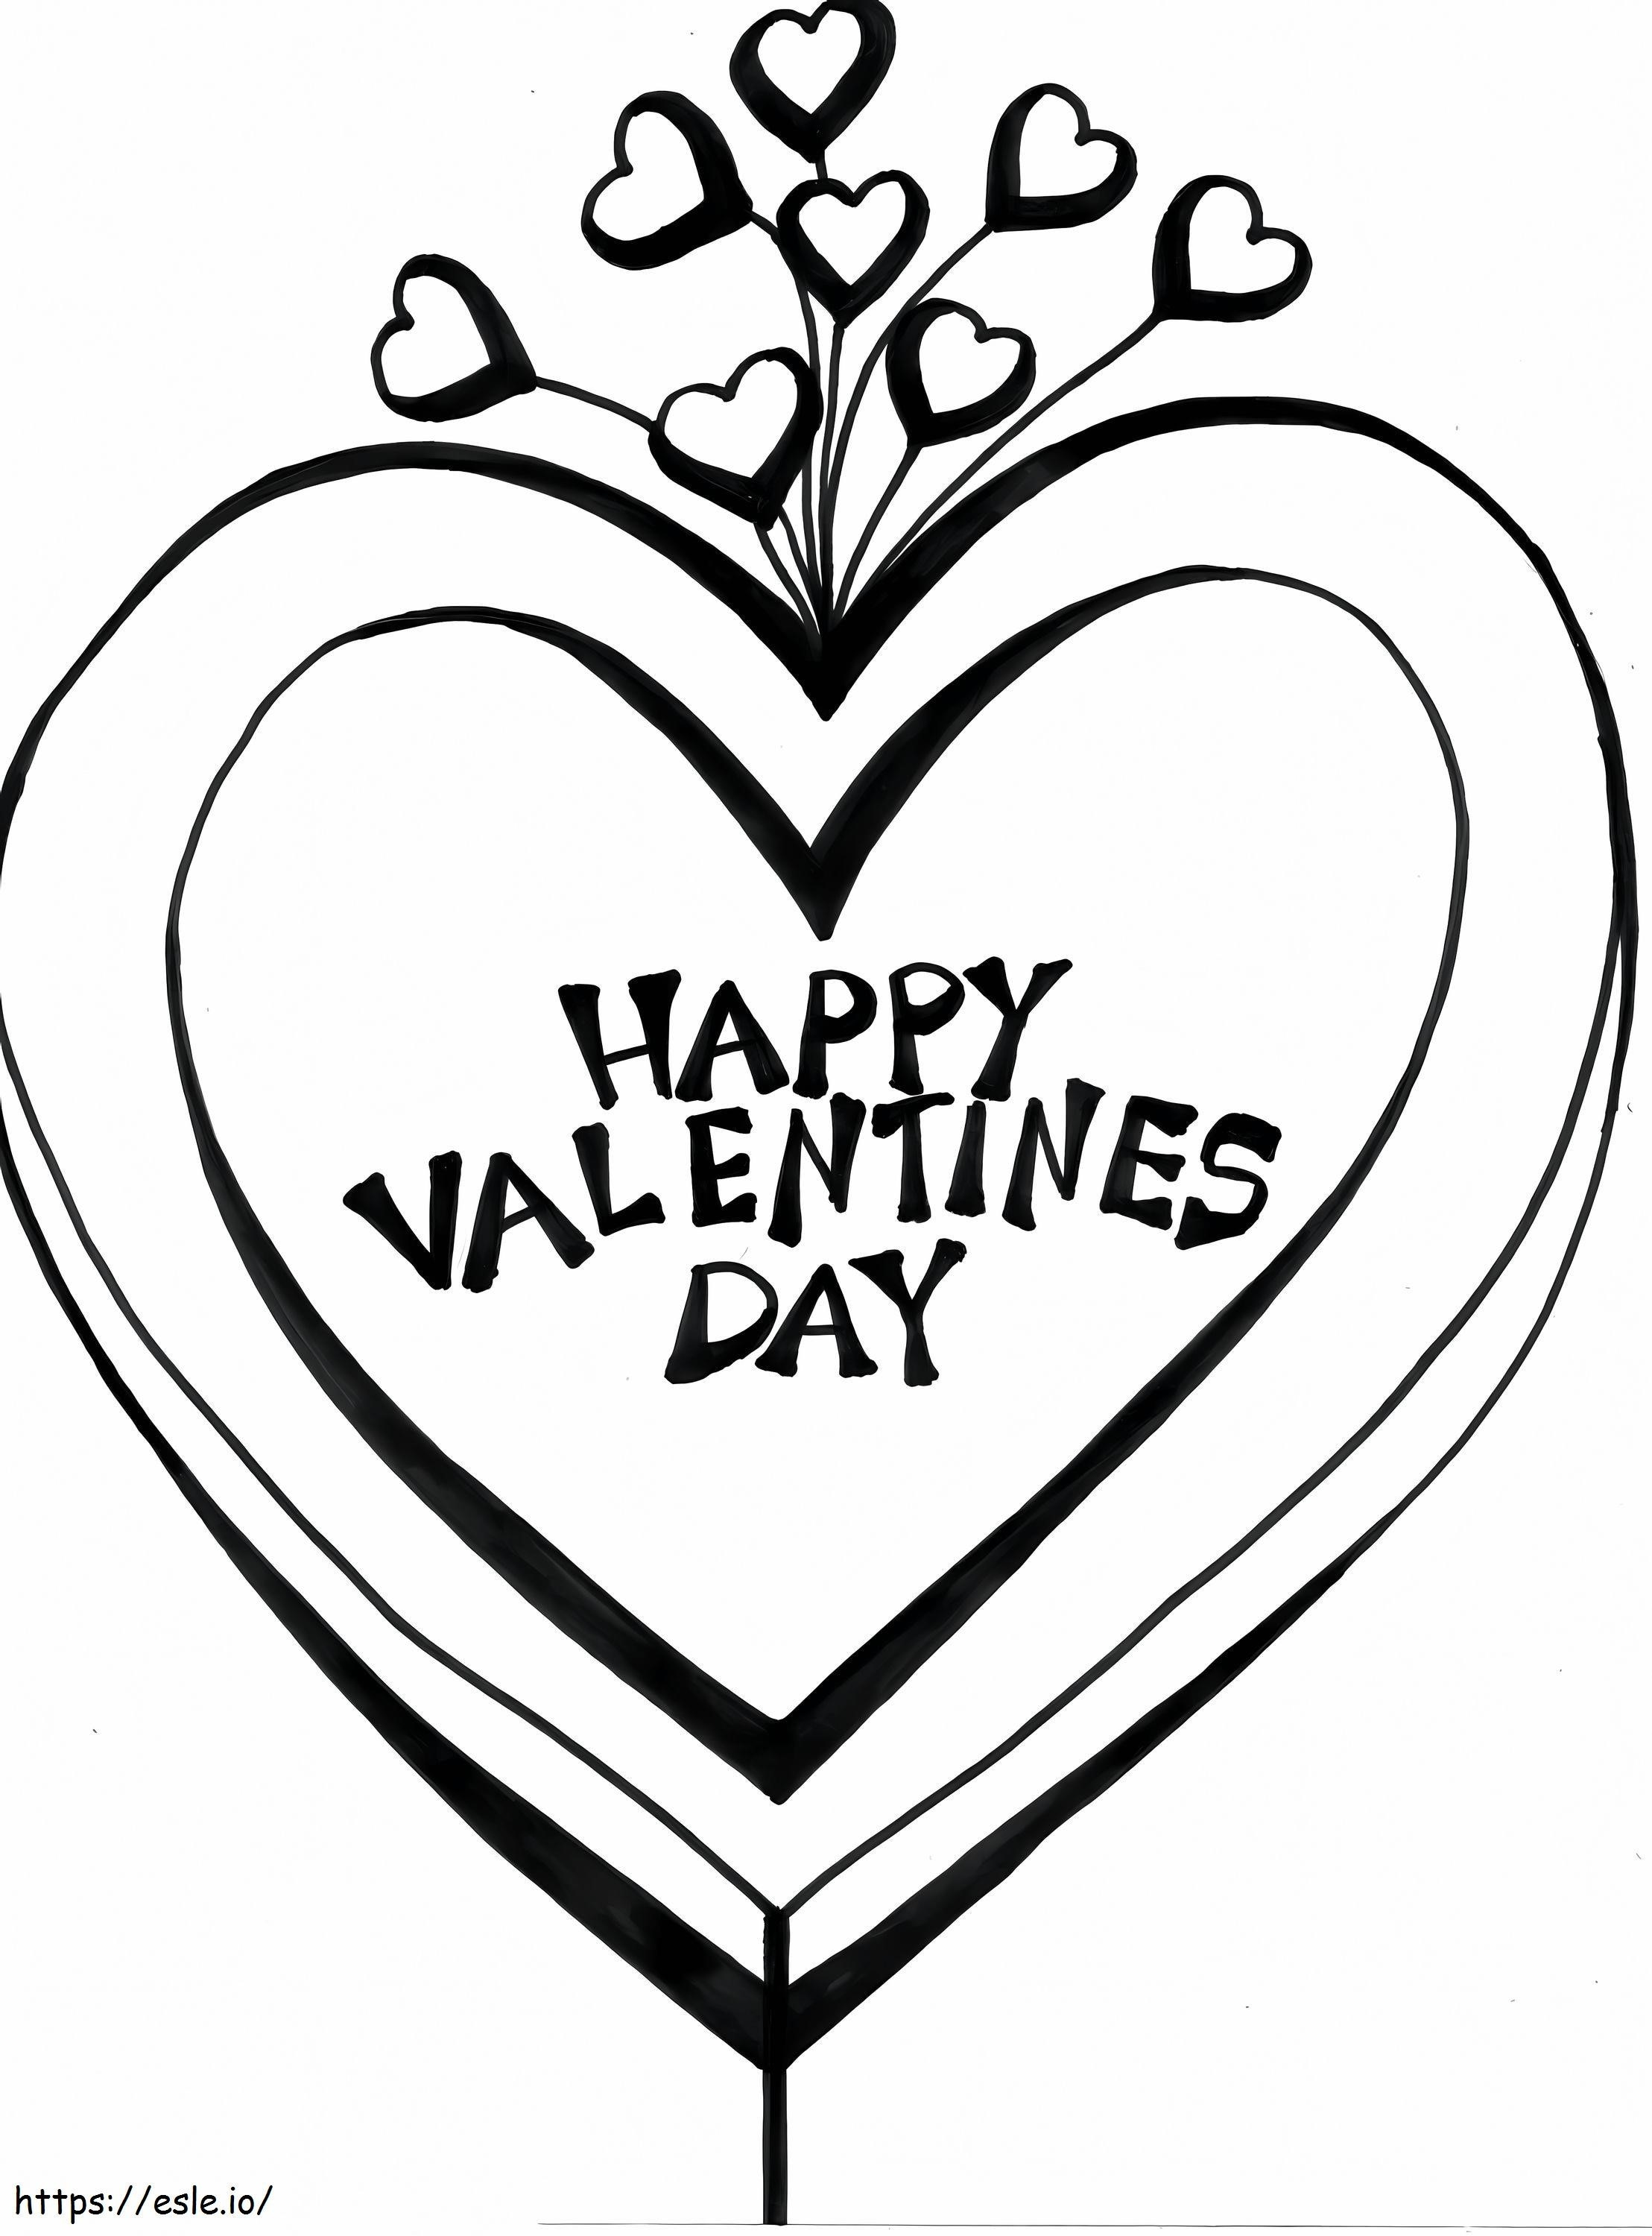 Happy Valentines Day Heart coloring page